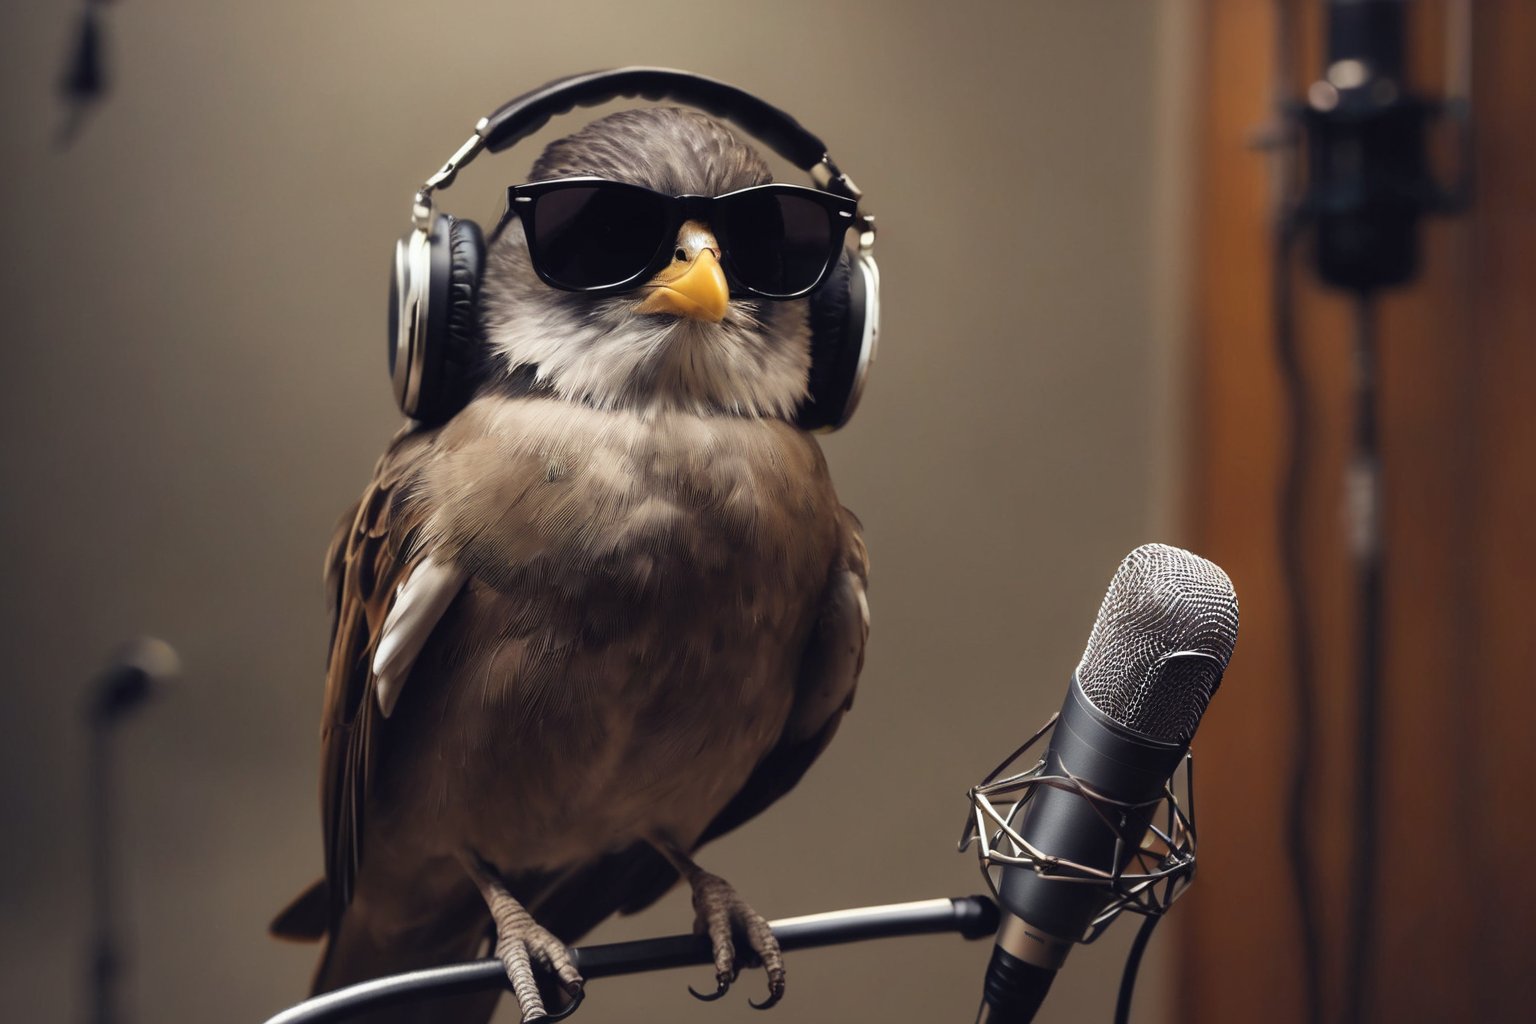 "A photograph of a bird wearing sunglasses and headphones and speaking into a high-end microphone in a recording studio.